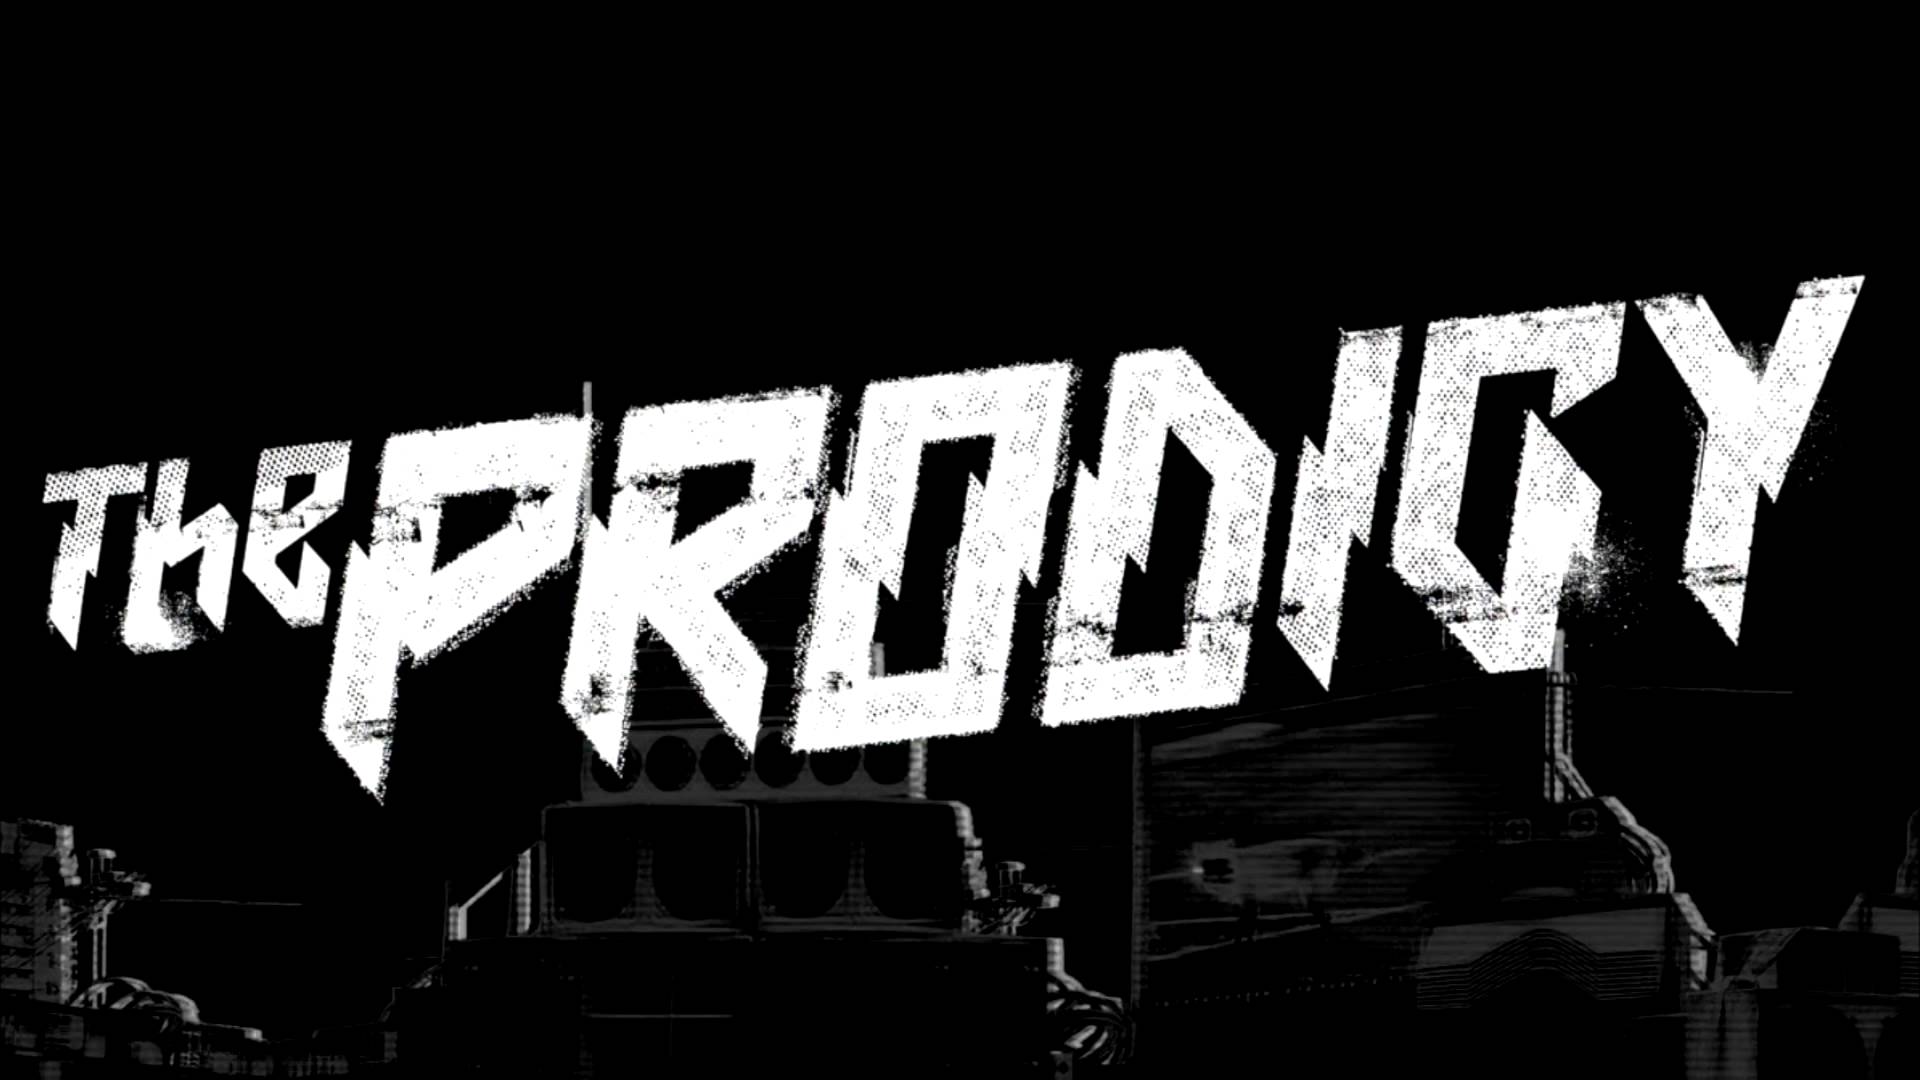 The Prodigy Wallpaper, Picture, Image